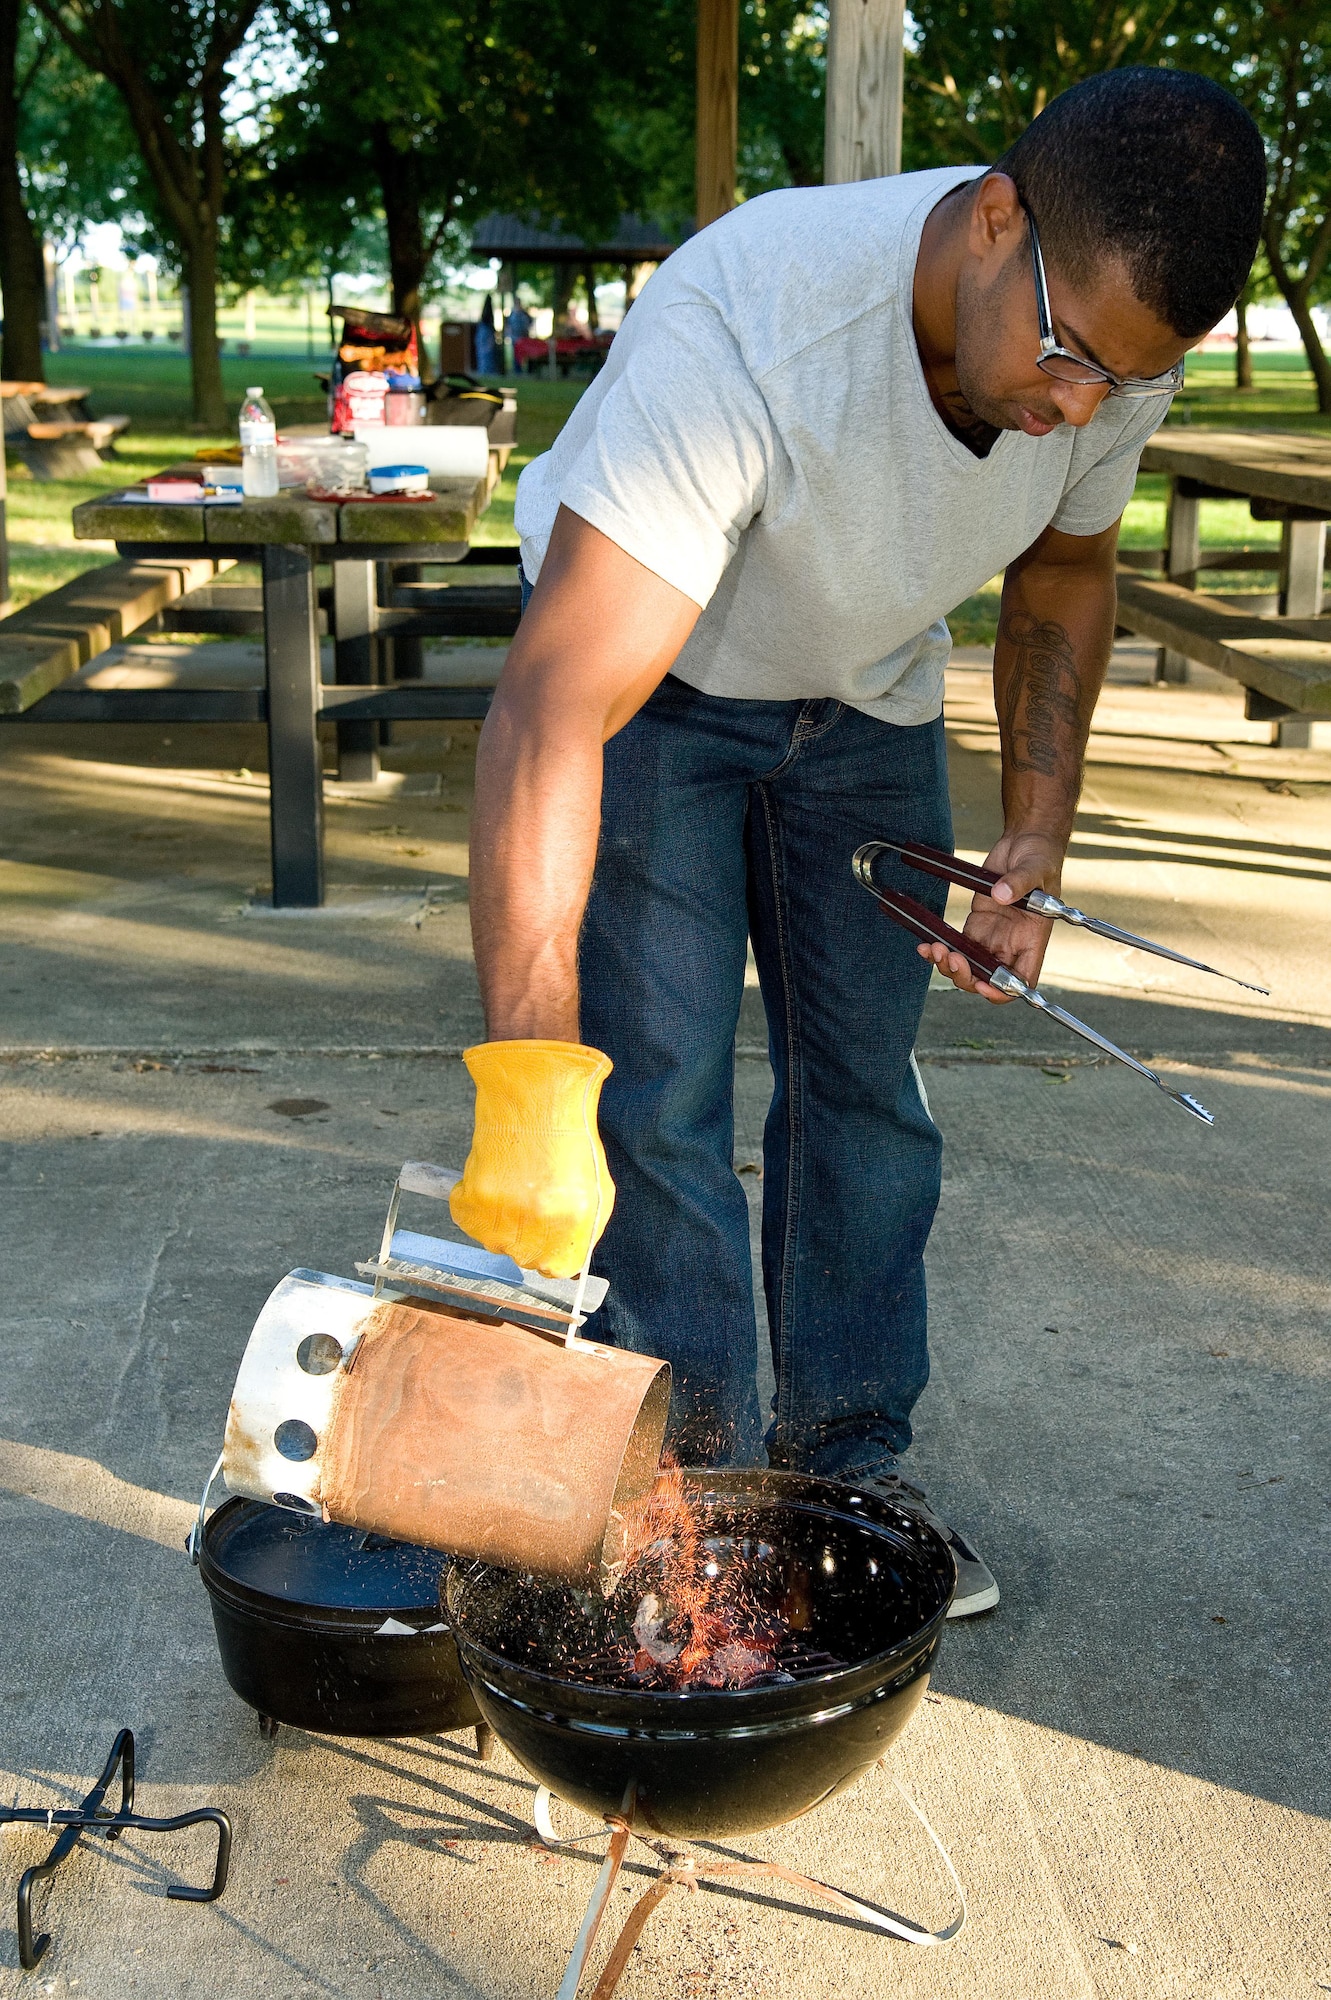 Airman 1st Class Shaughn Quarles, 436th Aerial Port Squadron, pours hot charcoals in a grill Sept. 13, 2016, at the Eagle’s Nest picnic area on Dover Air Force Base, Del. Quarles prepared the charcoal to be used for baking a blueberry cobbler prepared by Col. Randy Boswell, 436th Mission Support Group commander and Dorm to Gourm participants. (U.S. Air Force photo by Roland Balik)